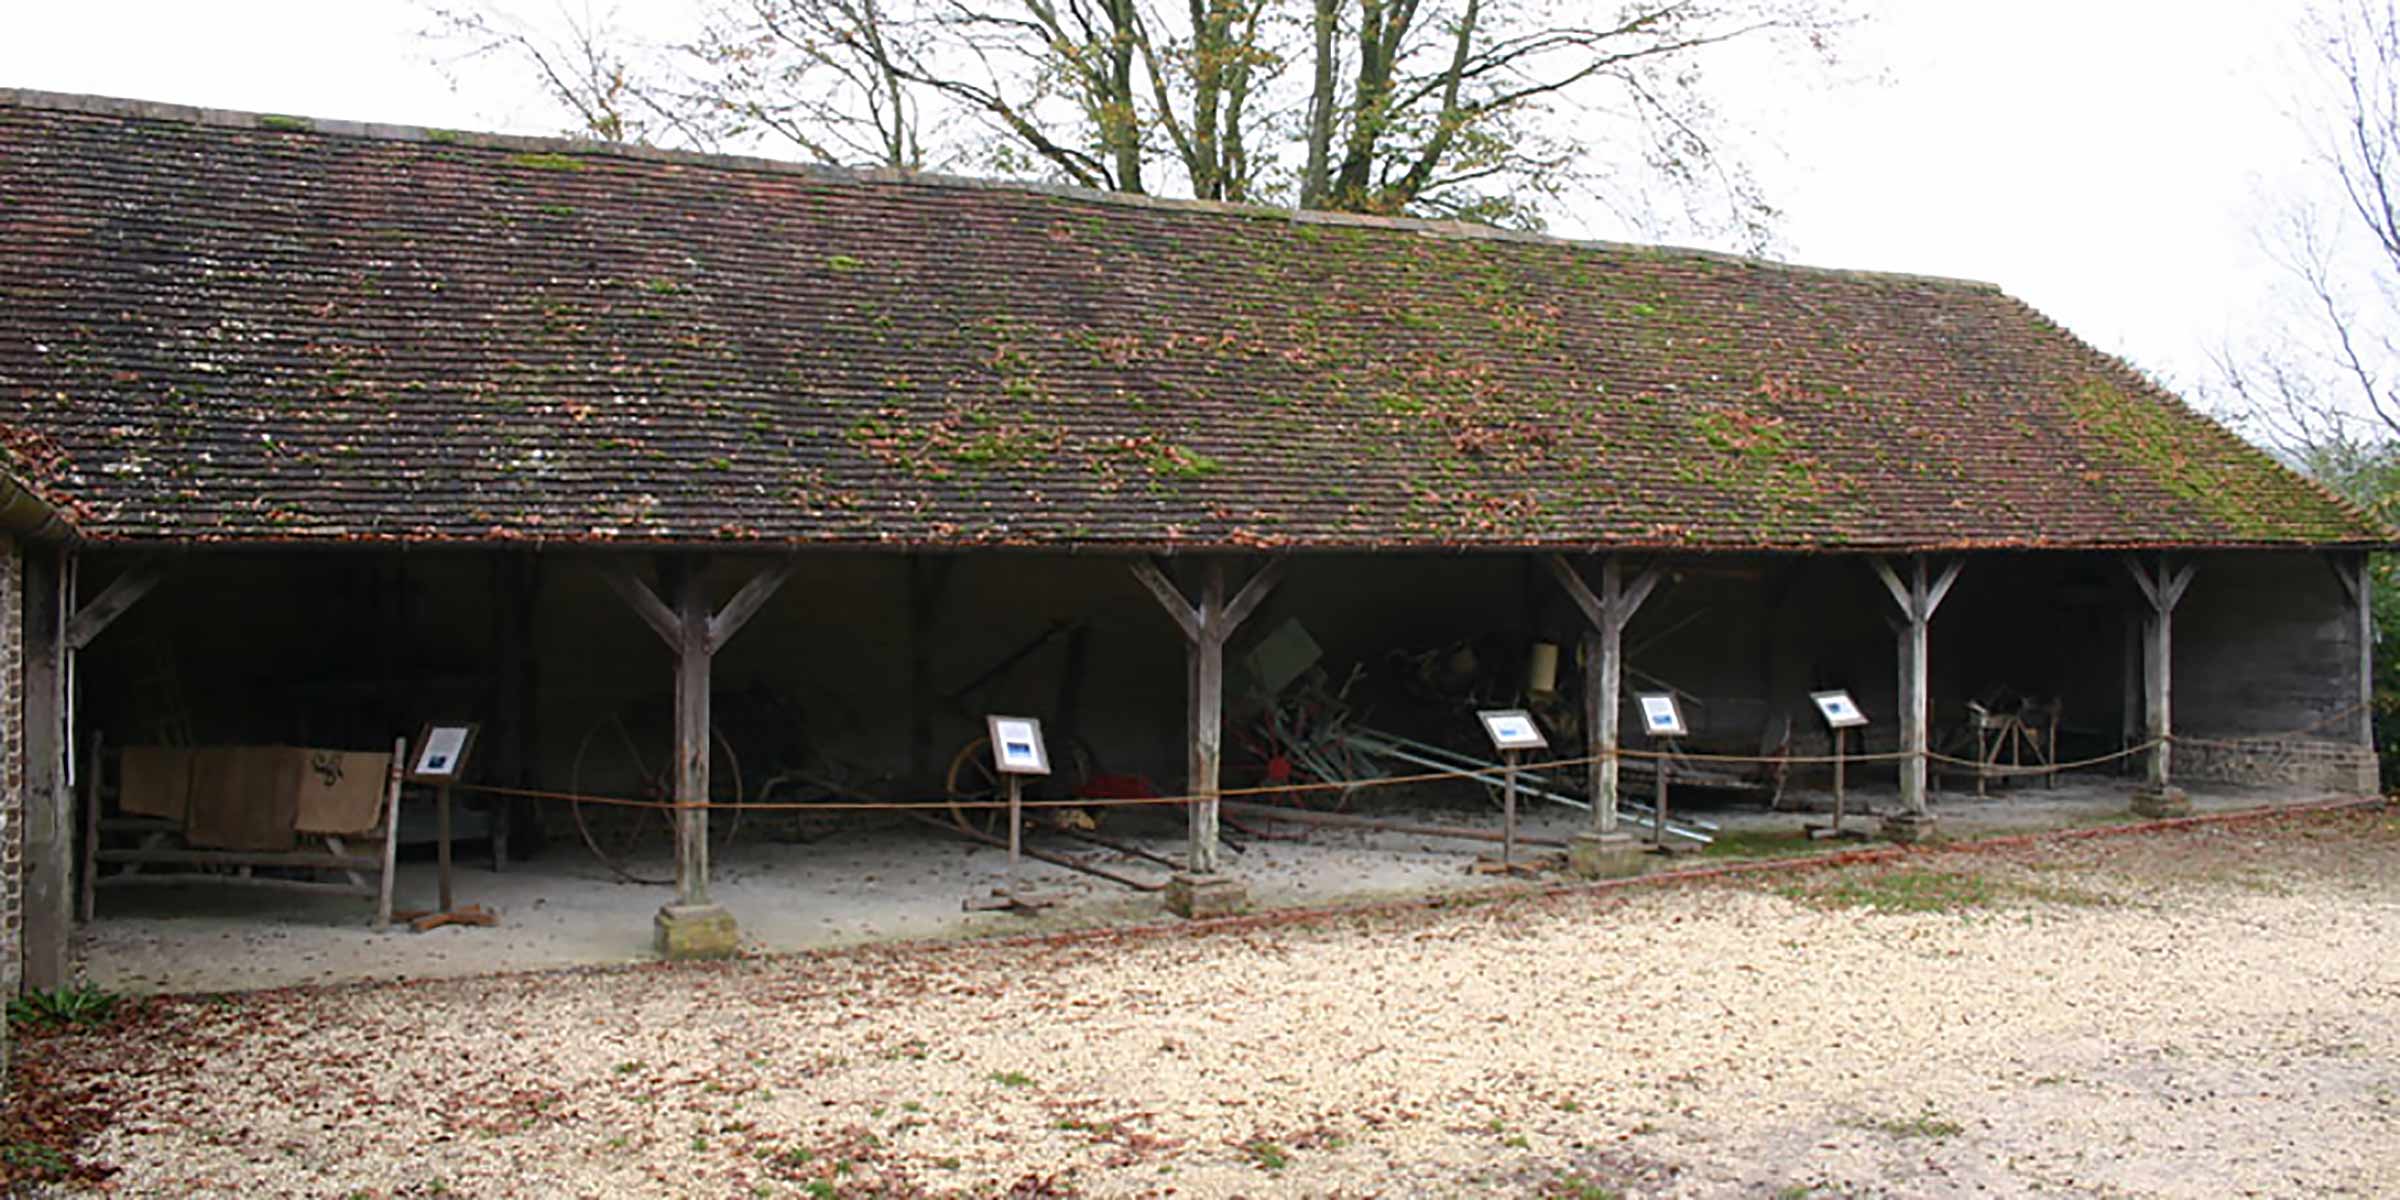 Sussex cattle shed